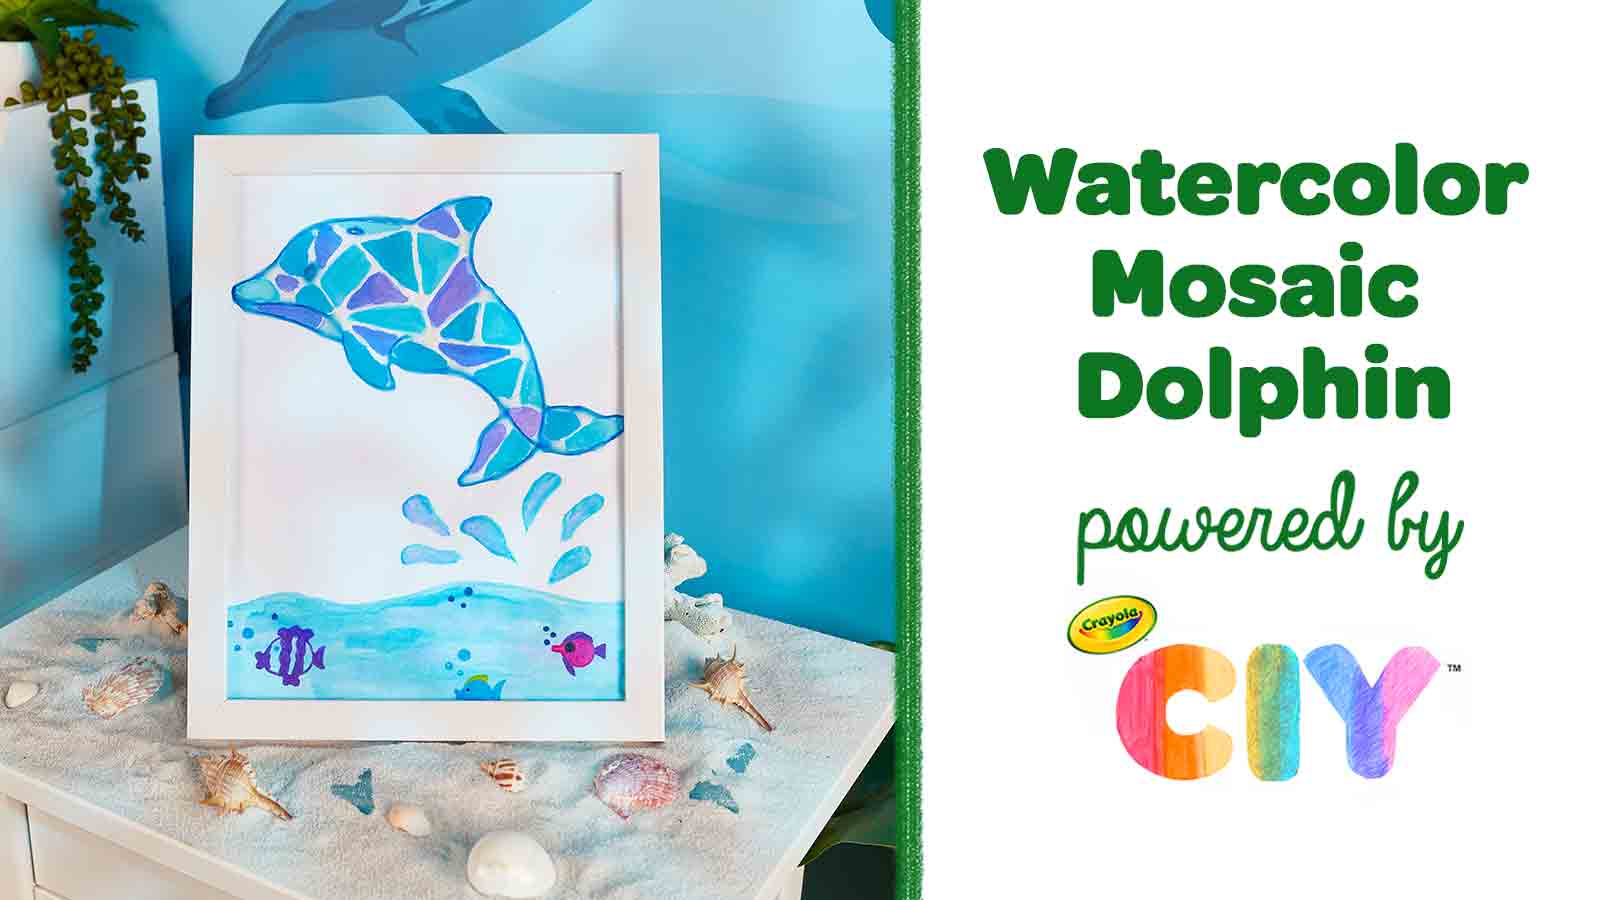 Watercolor-Mosaic-Dolphin_Poster-Frame